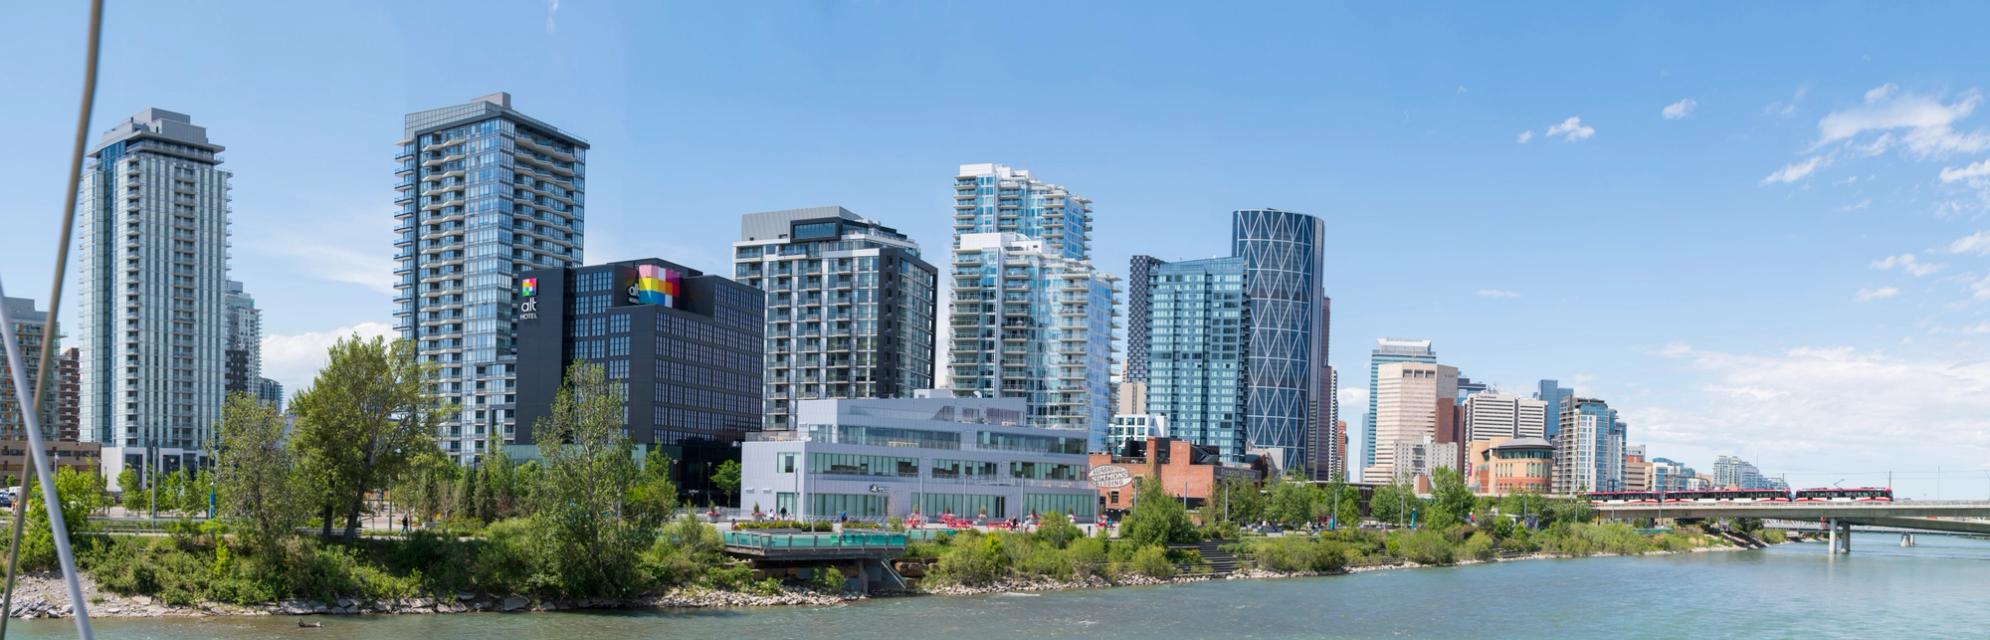 Panoramic photograph of East Village skyline on a sunny day looking west from St. Patrick's Island.